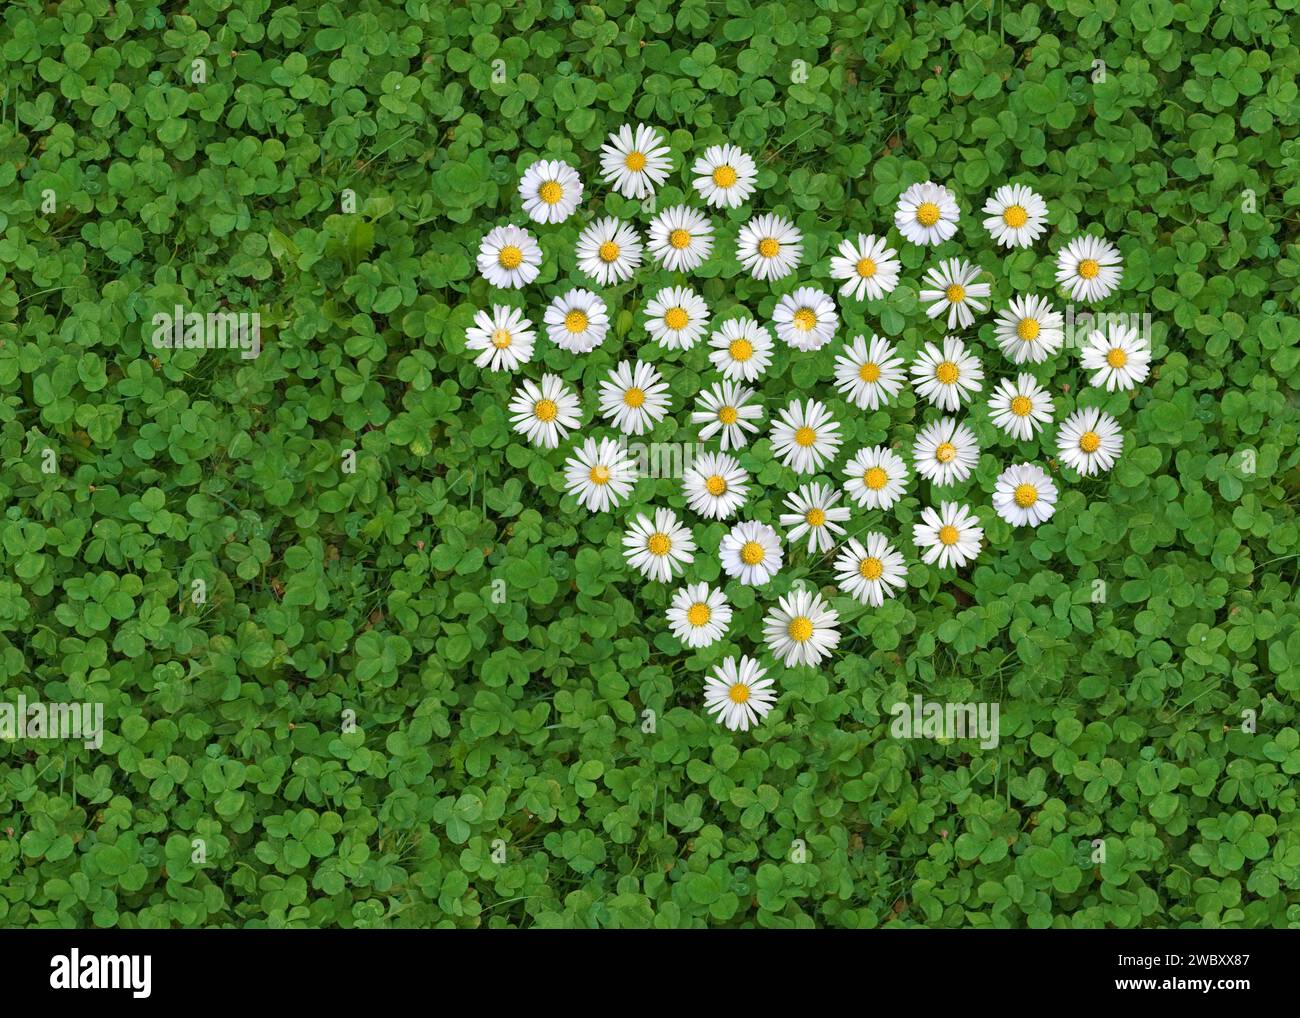 daisy  (Bellis perennis) formed like a heart on a white clover  (Trifolium repens) underground, symbol Stock Photo